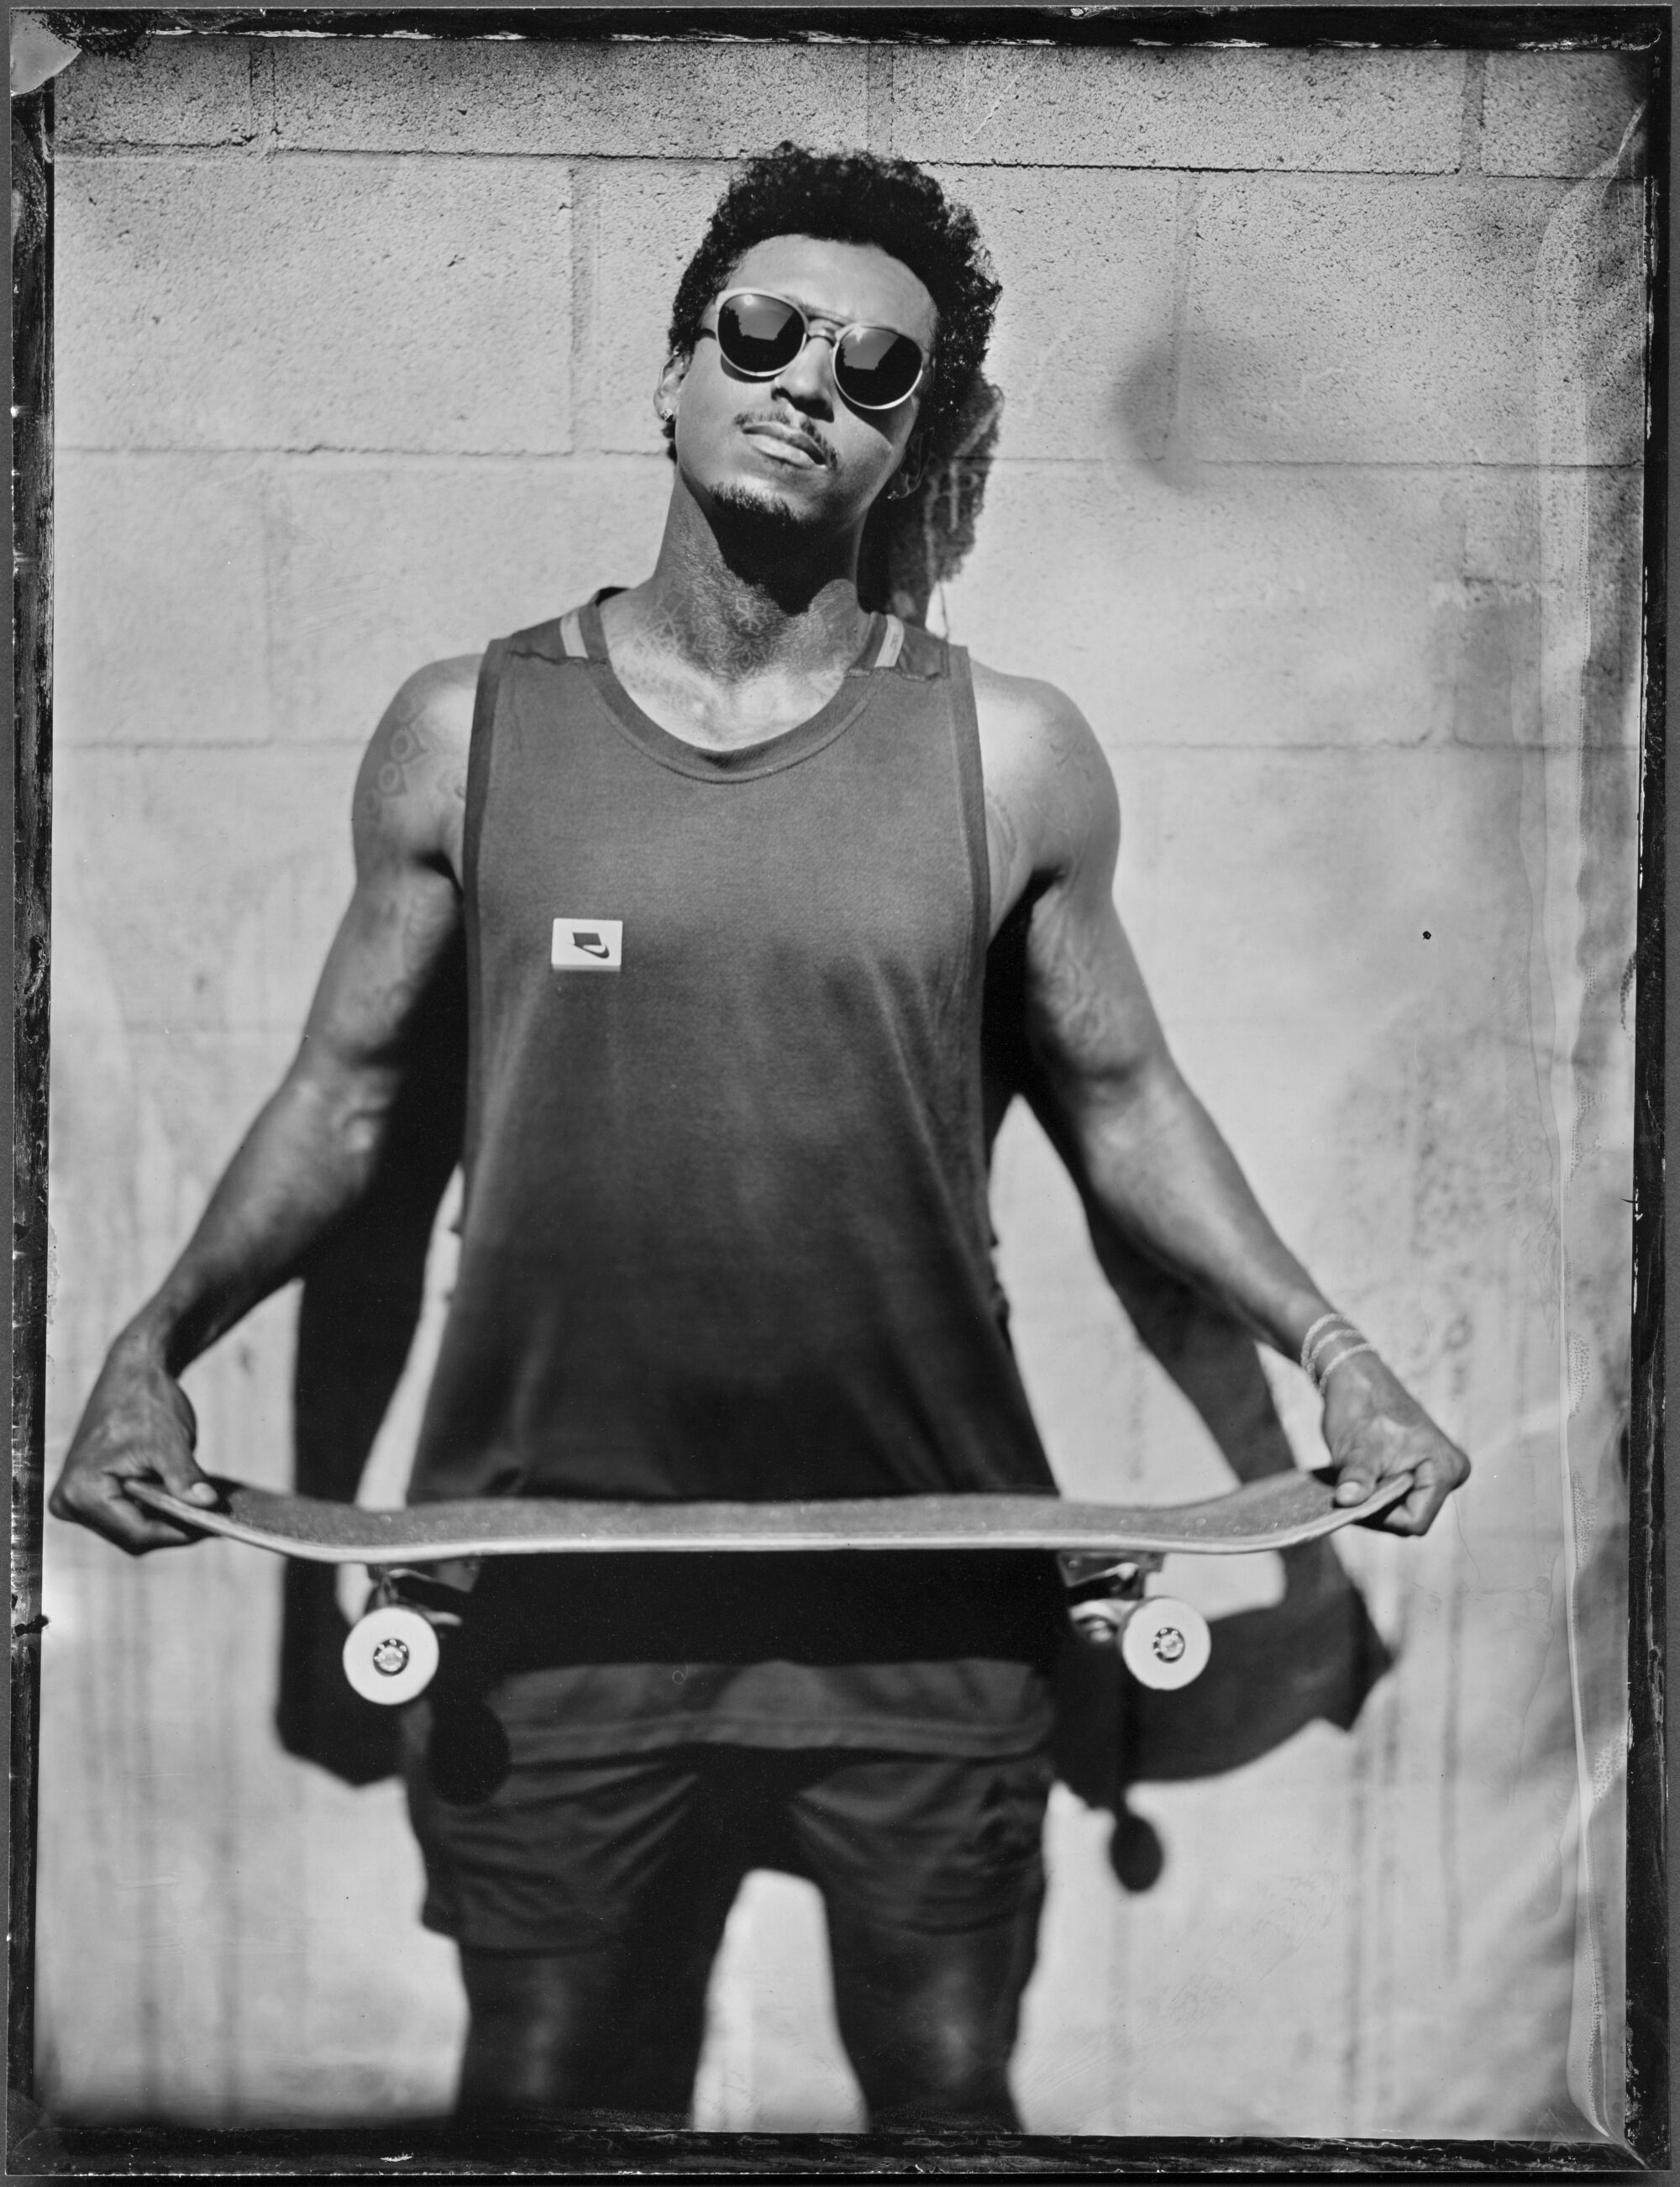 Nyjah Huston, the top-ranked skateboarder in the world, is seen in a tintype photograph